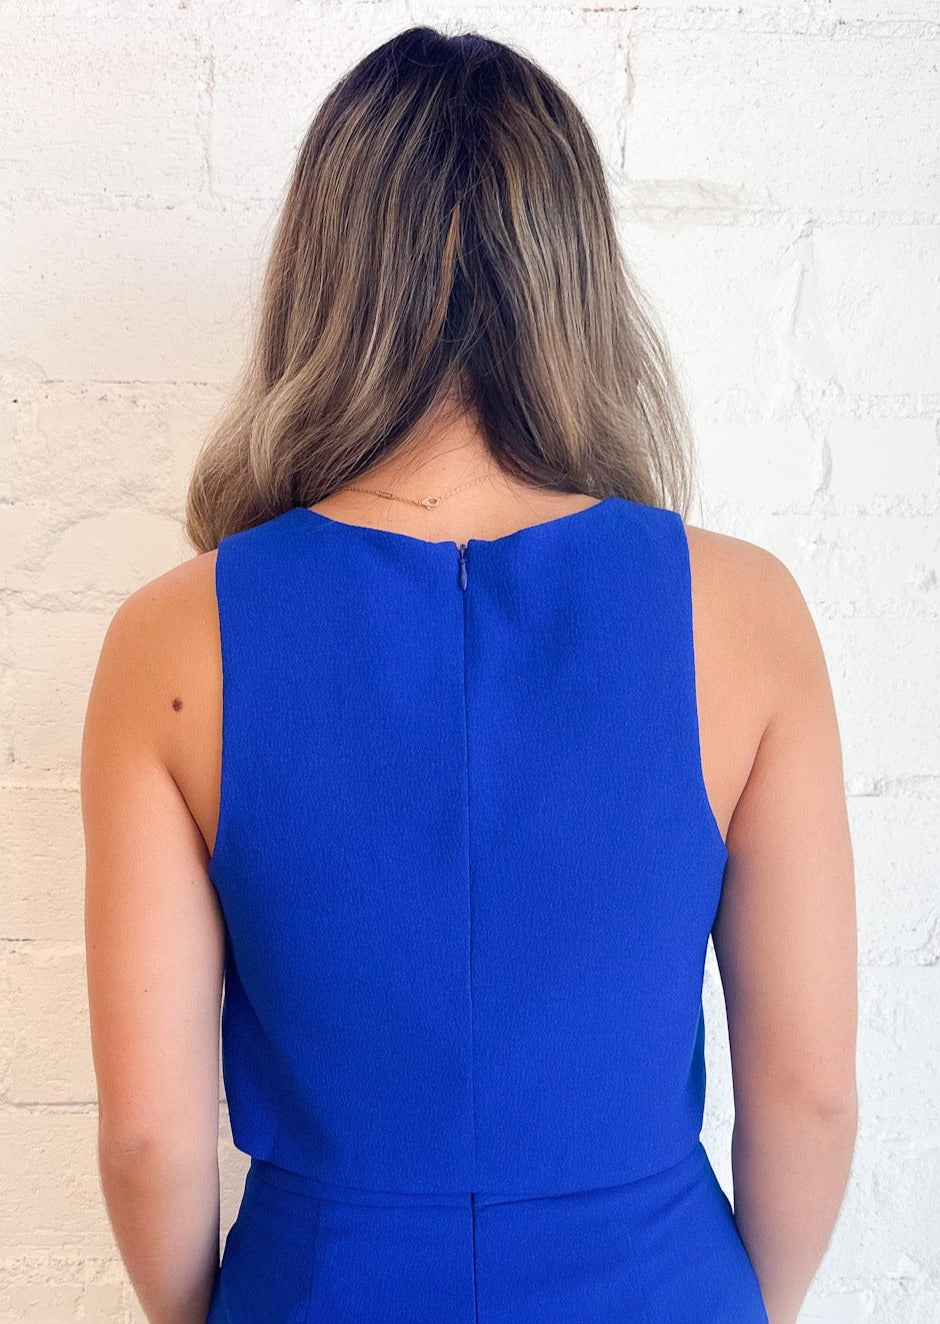 Feelin the Blues Top, Tops, Adeline, Adeline, dallas boutique, dallas texas, texas boutique, women's boutique dallas, adeline boutique, dallas boutique, trendy boutique, affordable boutique